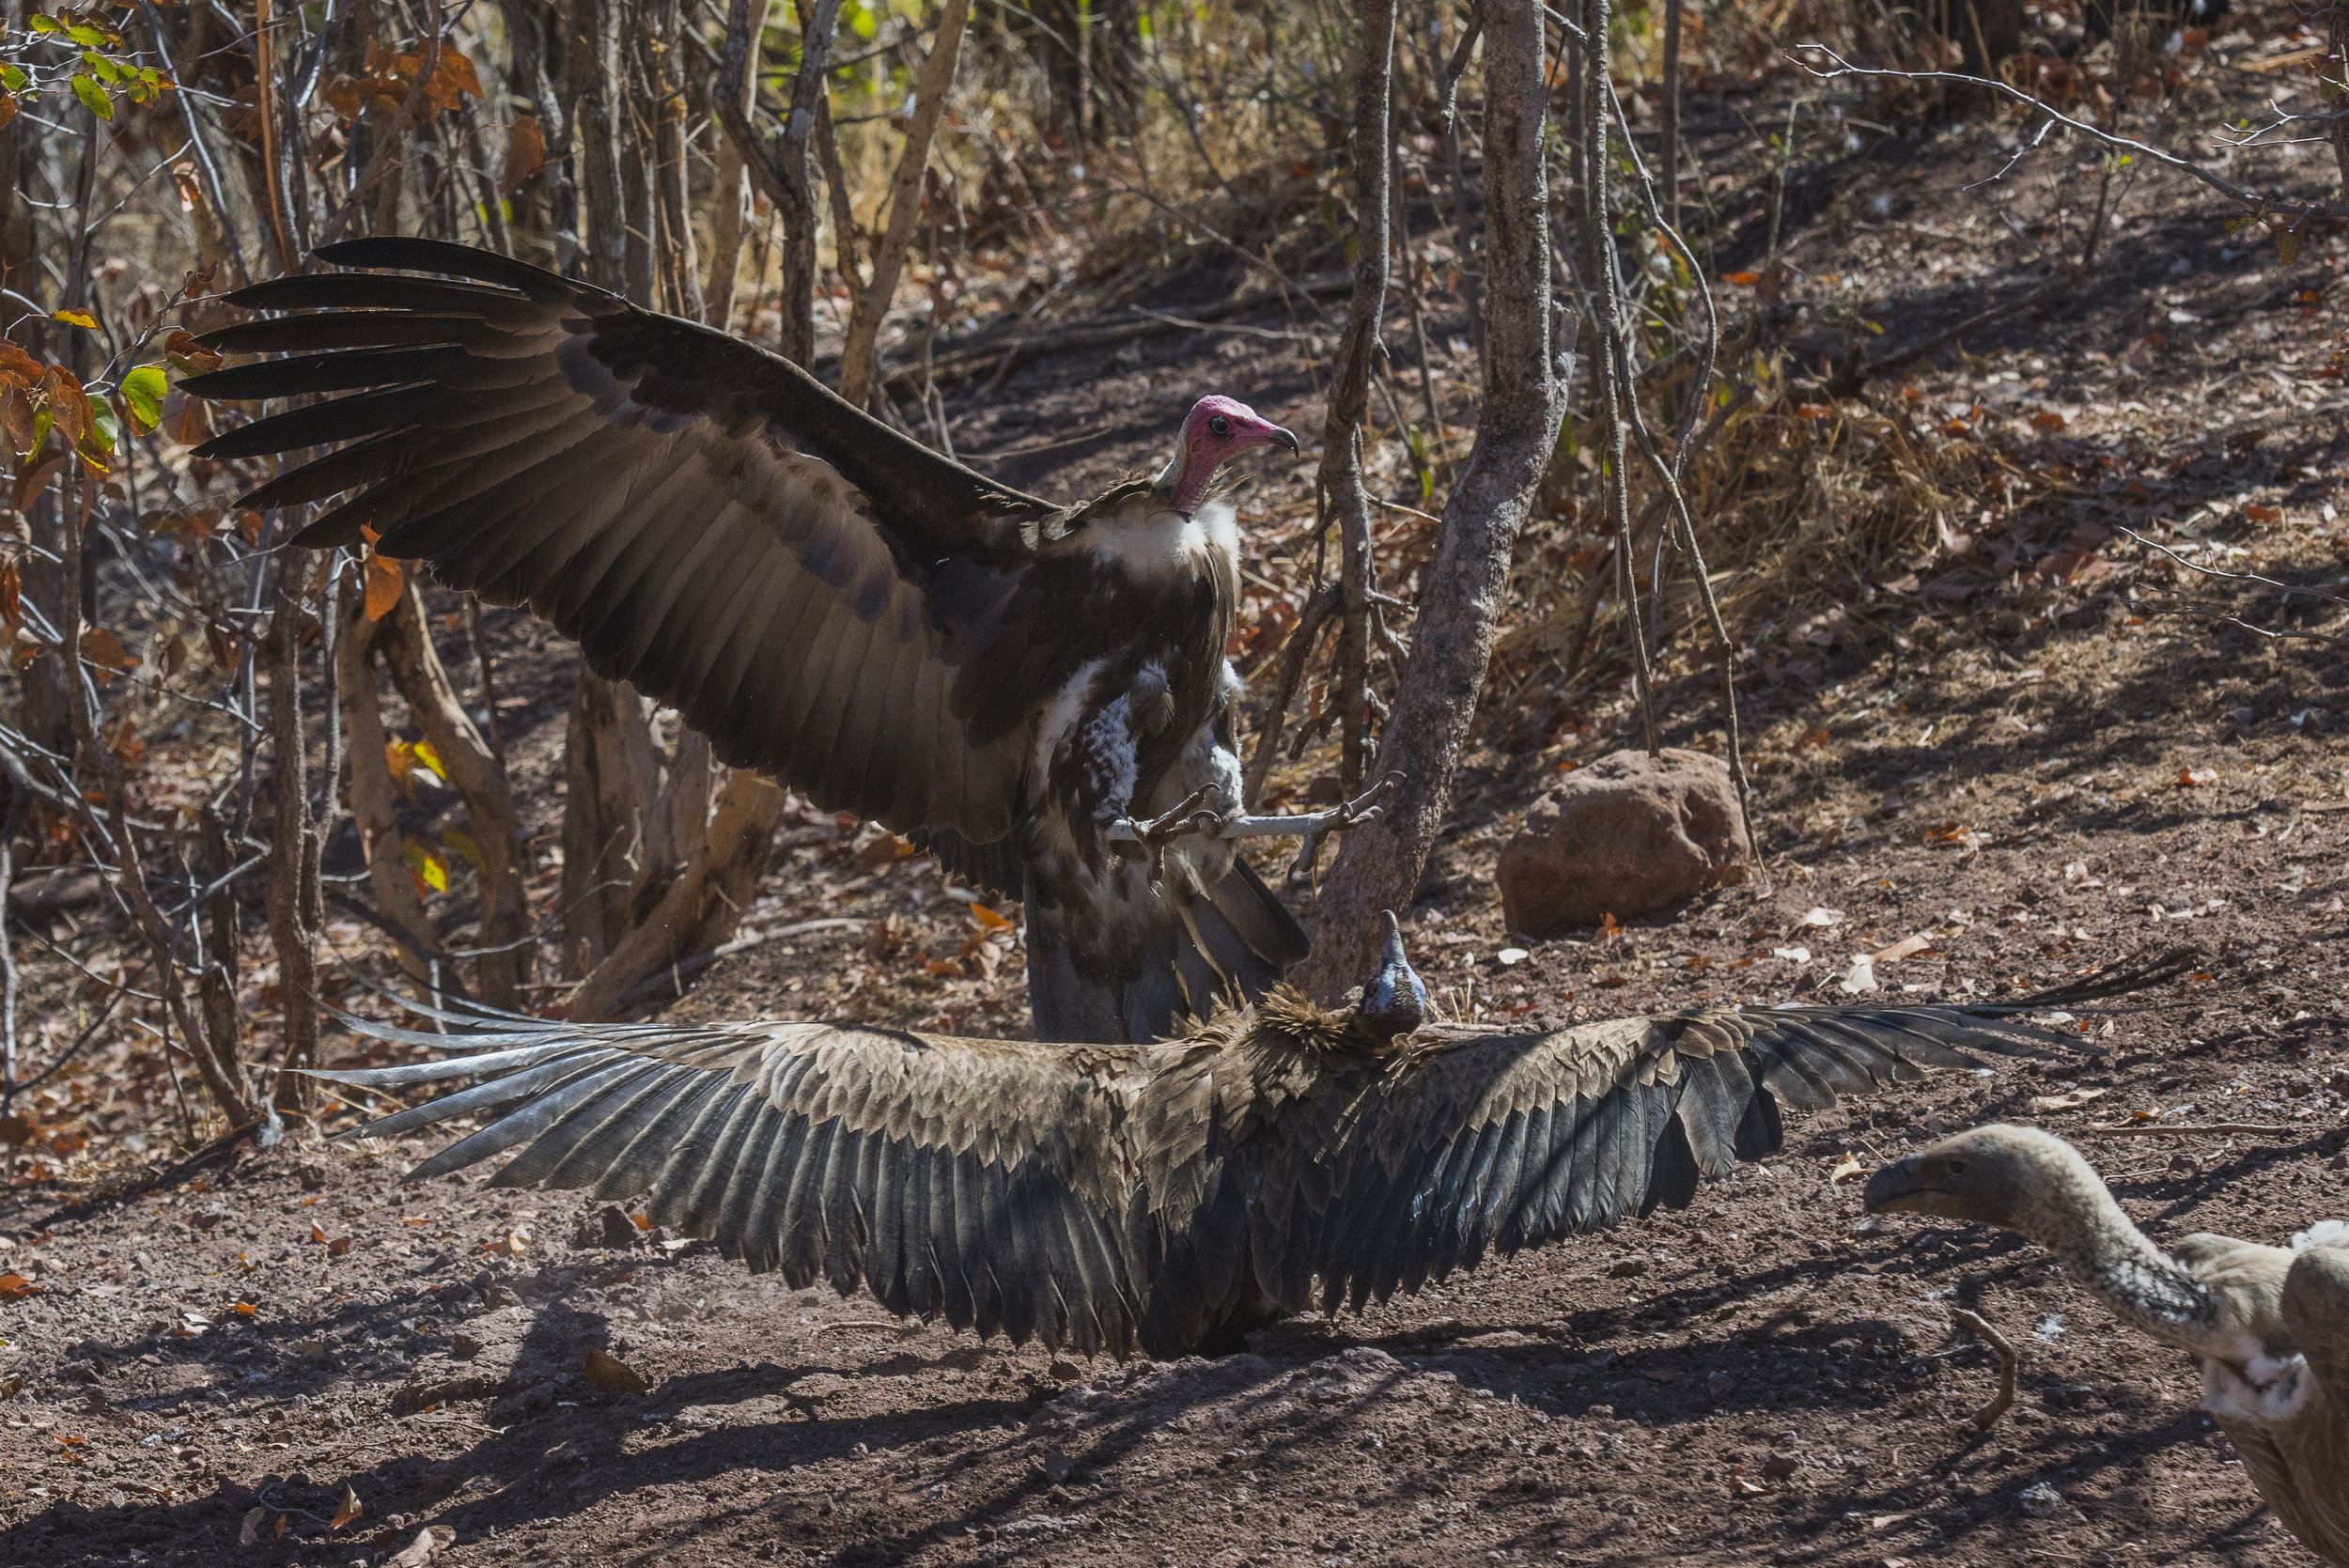  Vultures have played an unwilling conspirator in the decline of lion populations across Africa. Farmers and ranchers have lost livestock to lions for thousands of years and up until recently the only way of retribution was to hunt the culprits with 